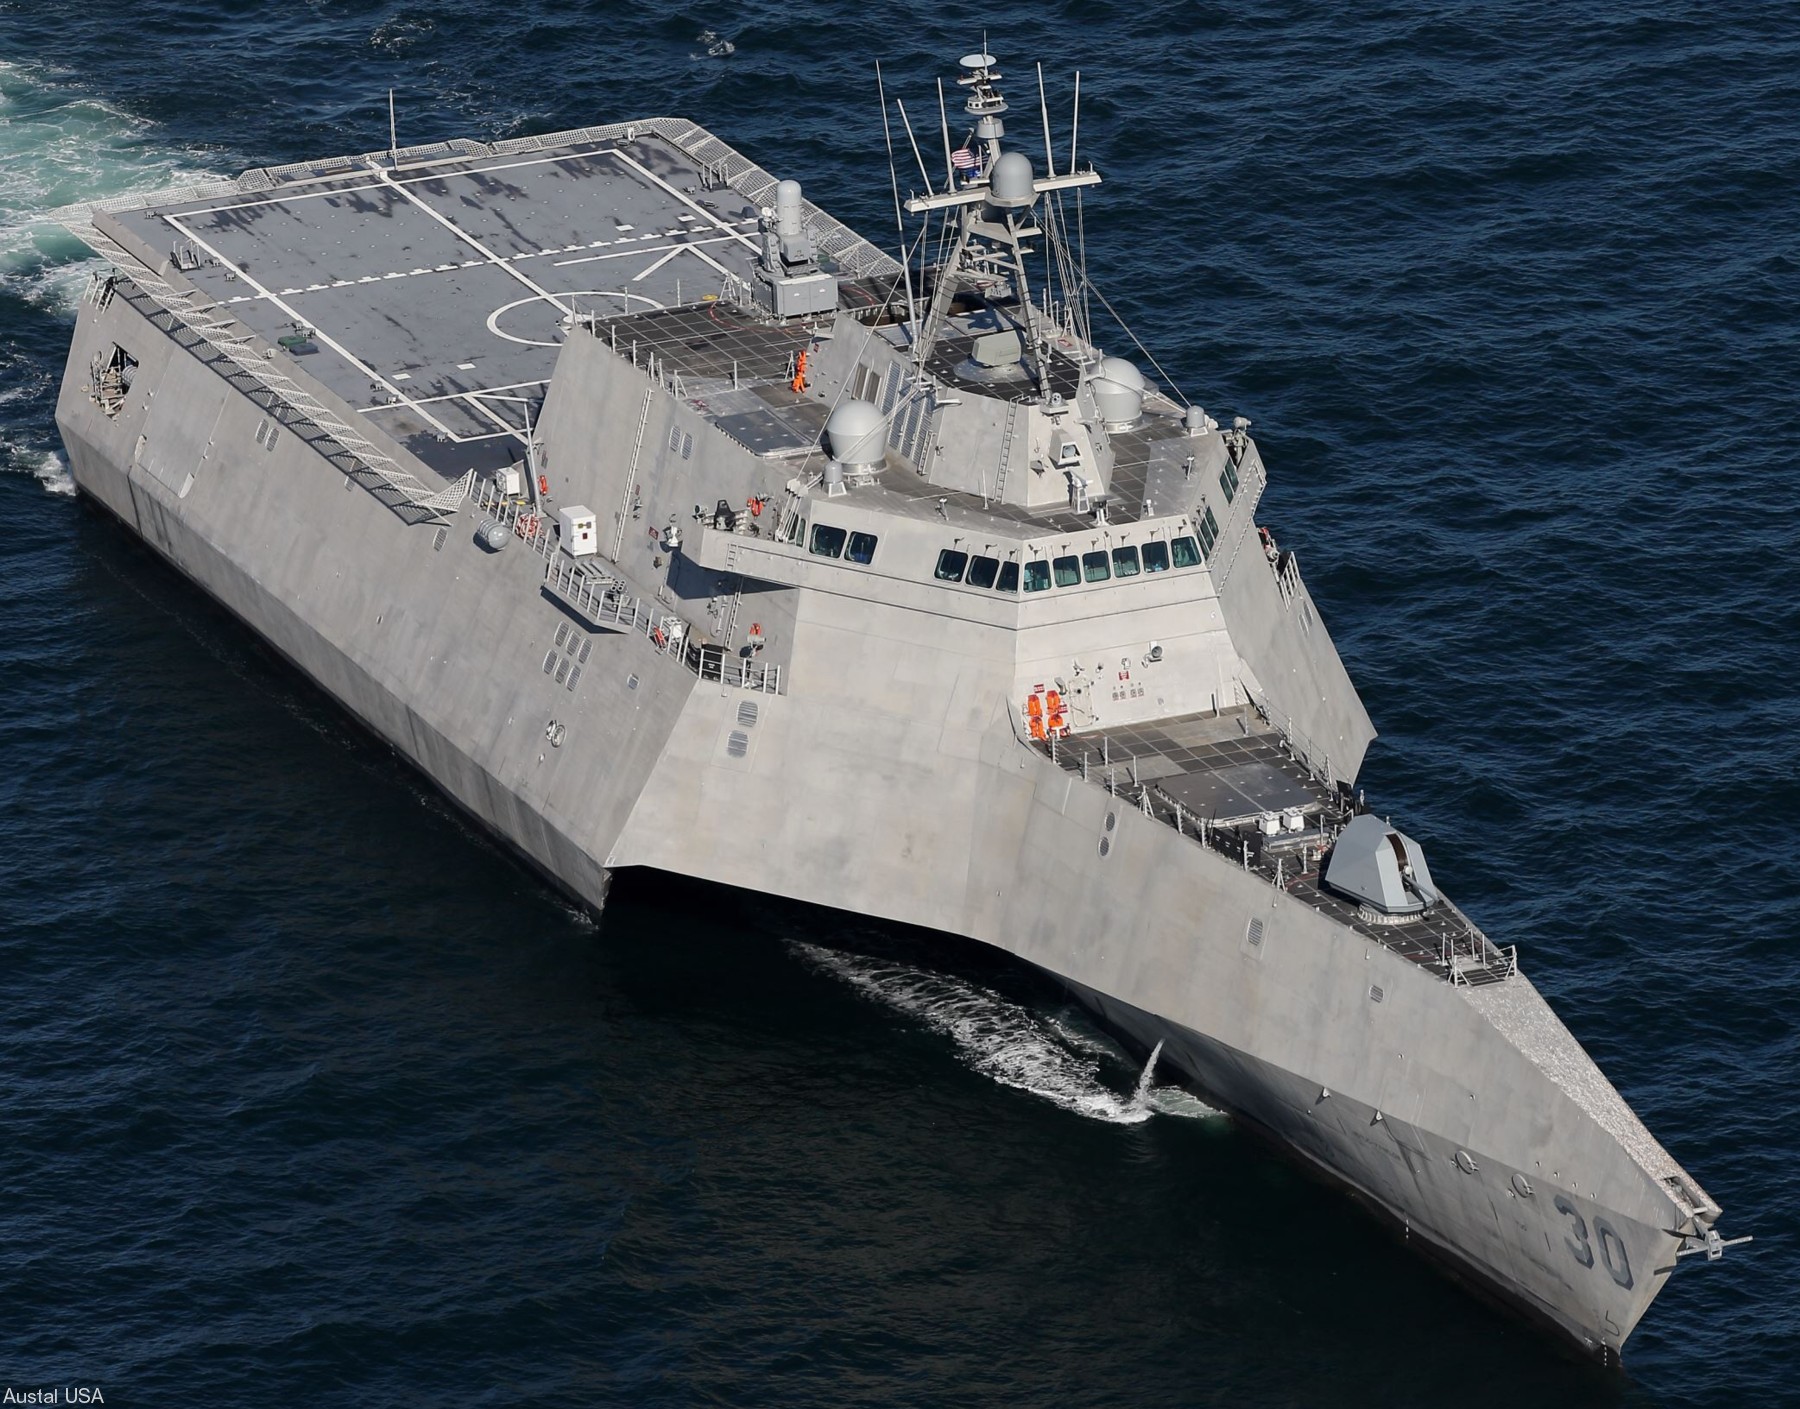 lcs-30 uss canberra littoral combat ship independence class us navy 05